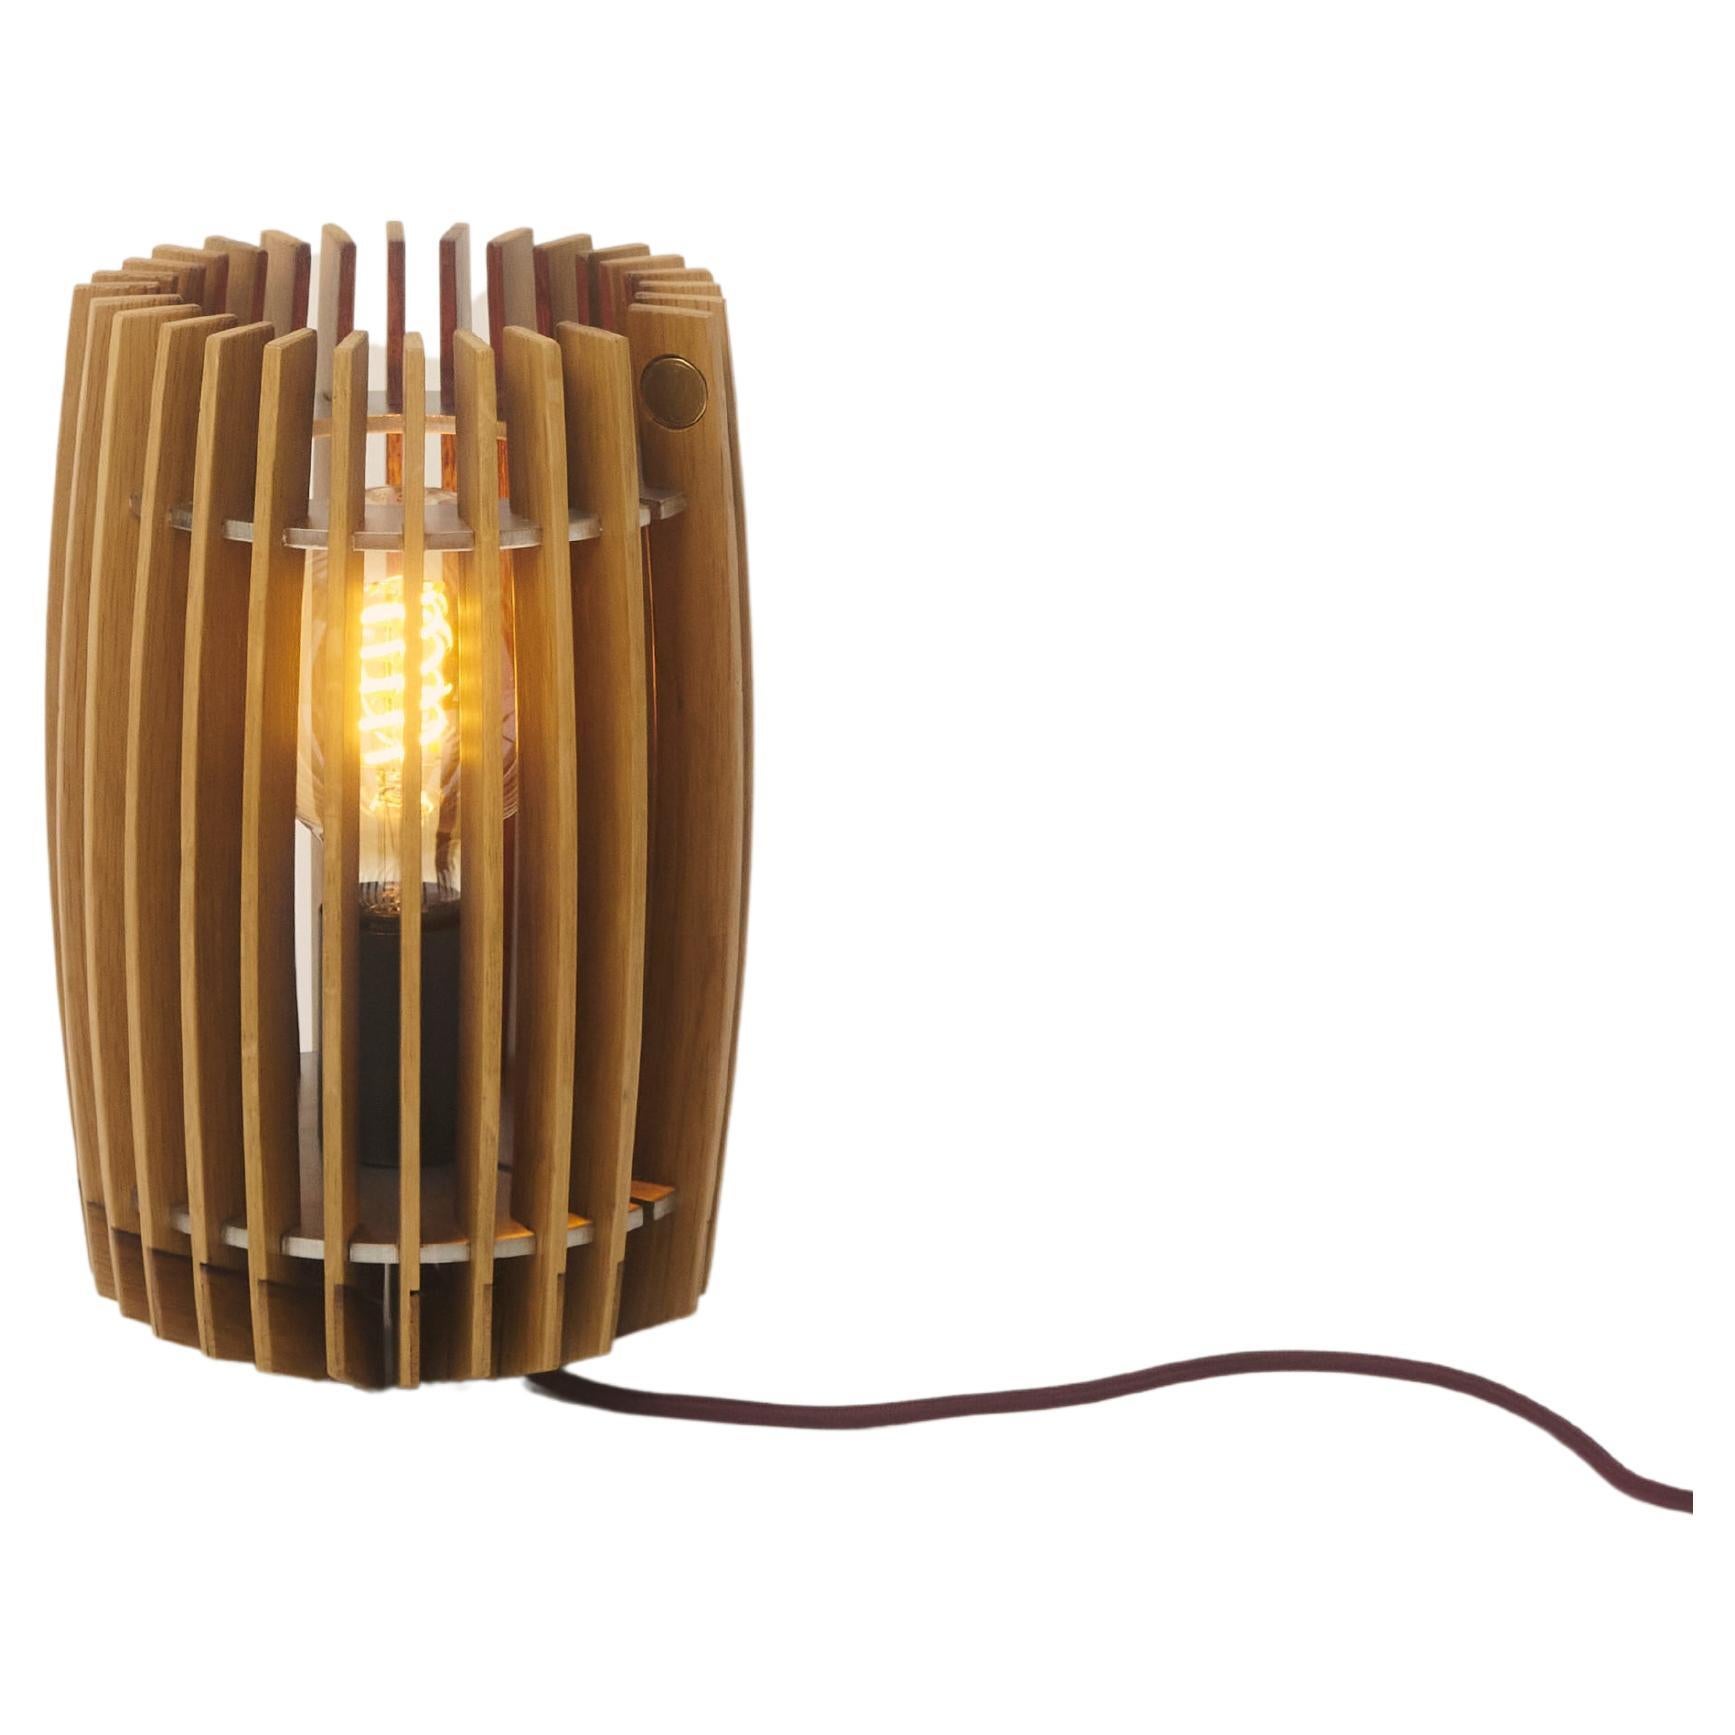 Bosa table lamp by Winetage handmade in Italy